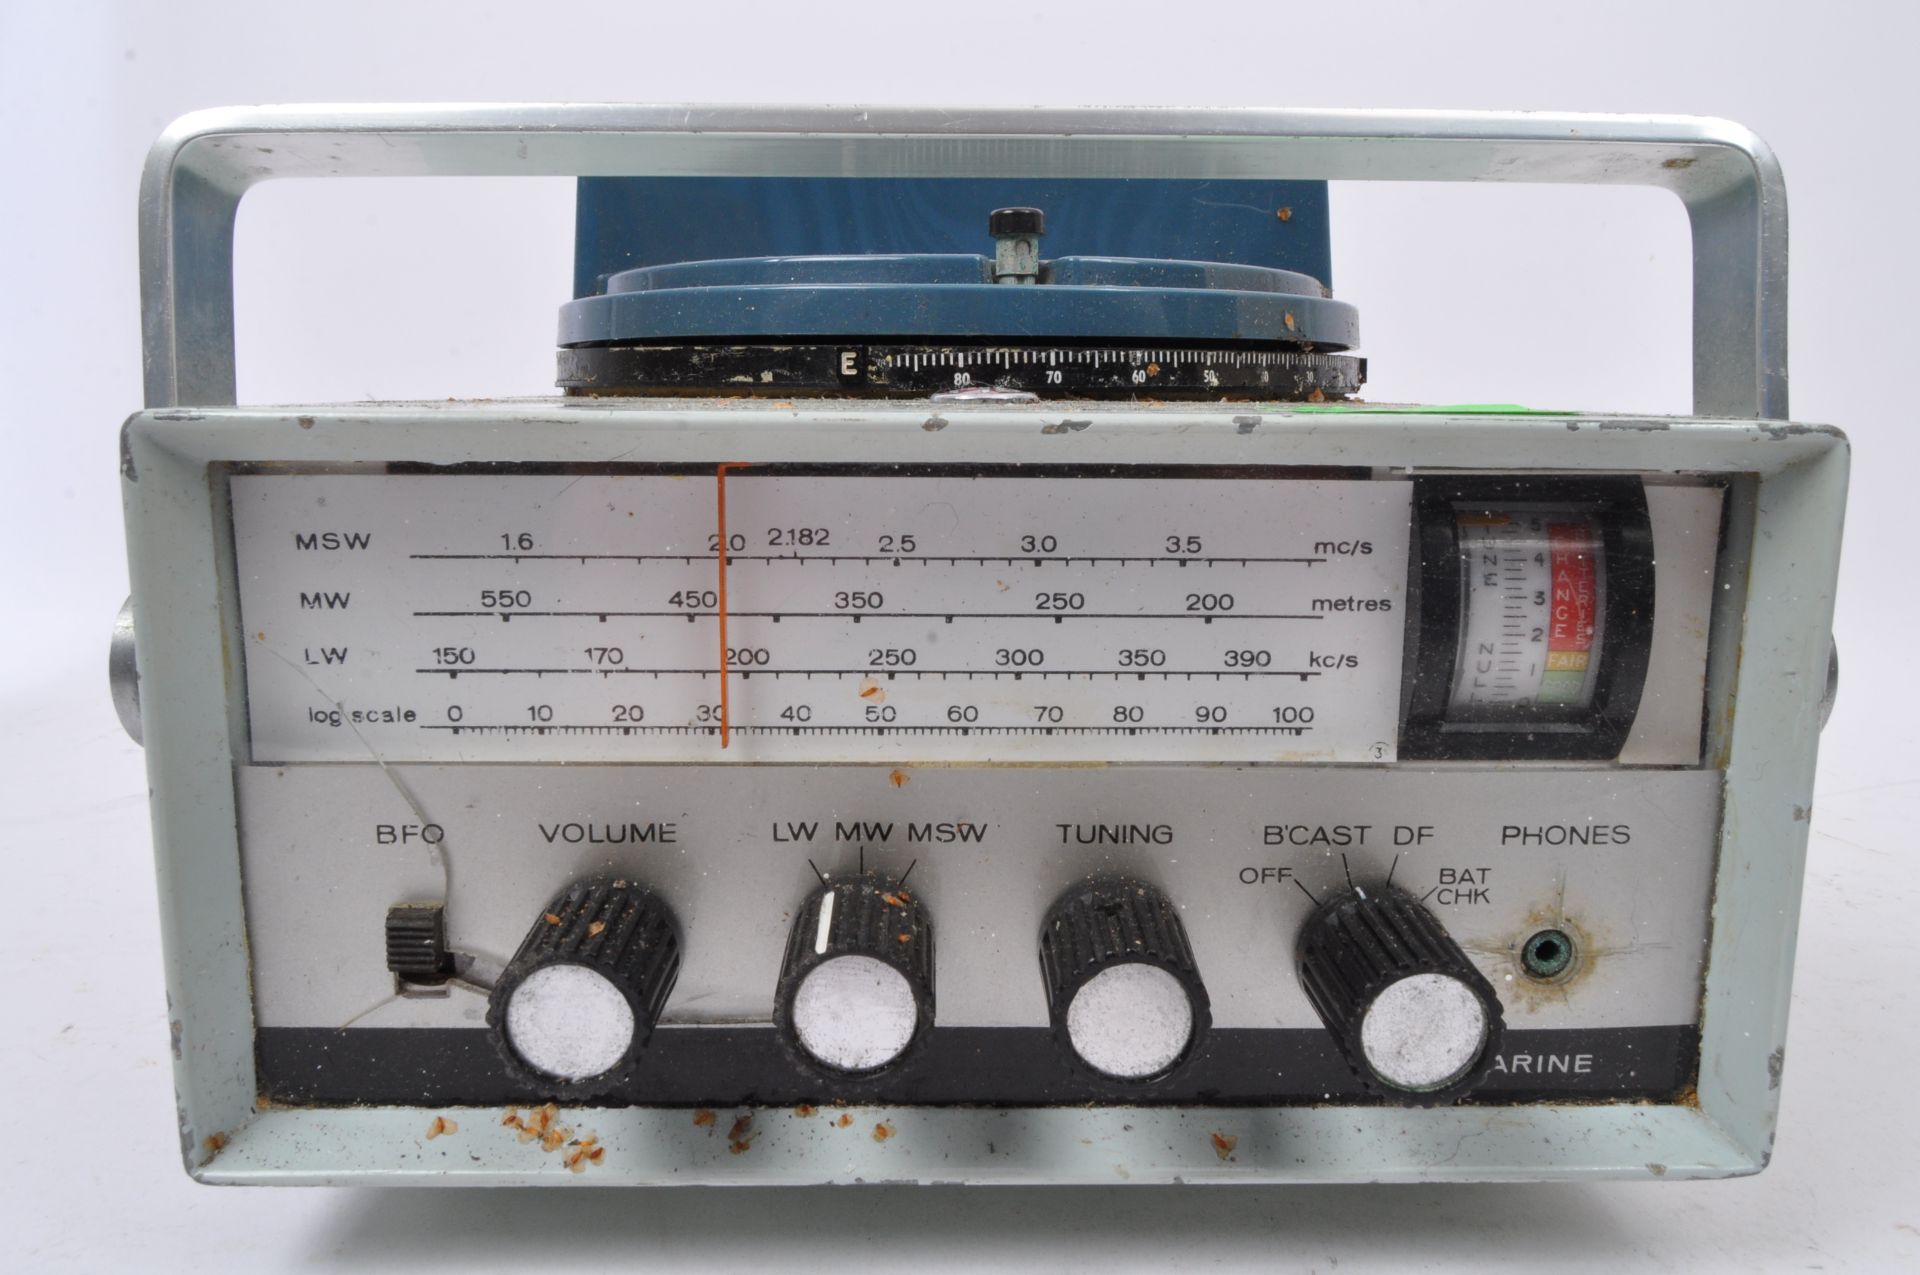 VINTAGE COOMBER 3011 TIMER CASSETTE PLAYER T/W PYE MKII RECEIVER - Image 4 of 5